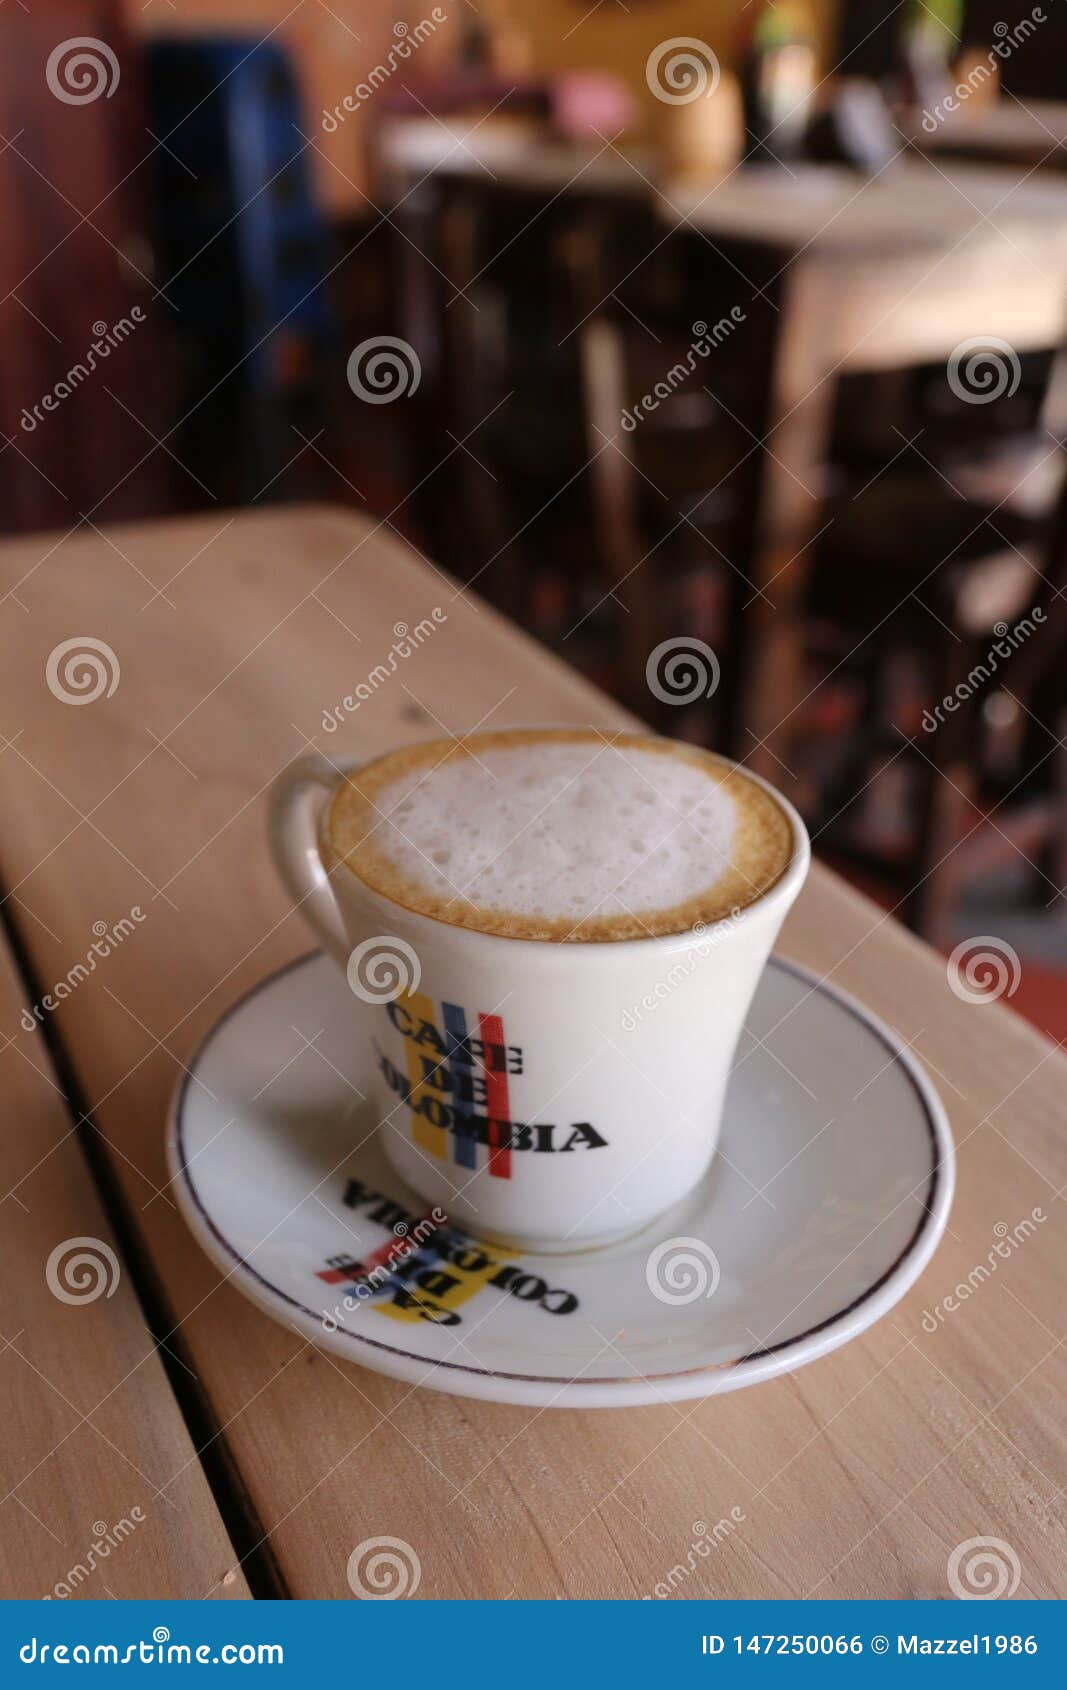 colombian capuccino